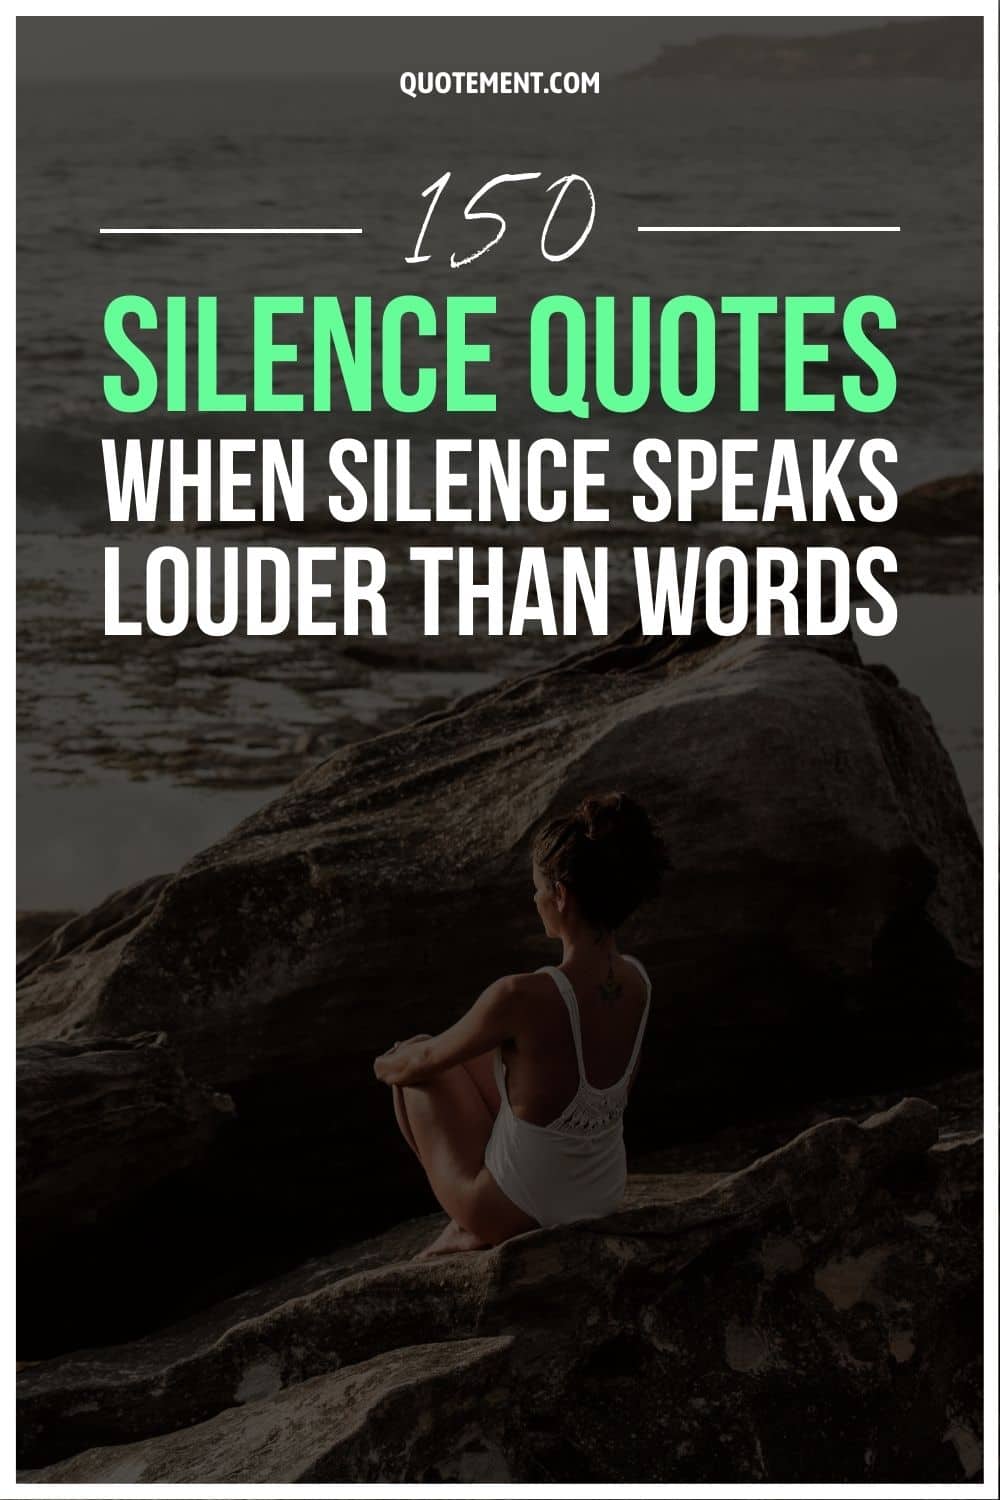 150 Silence Quotes When Silence Speaks Louder Than Words
